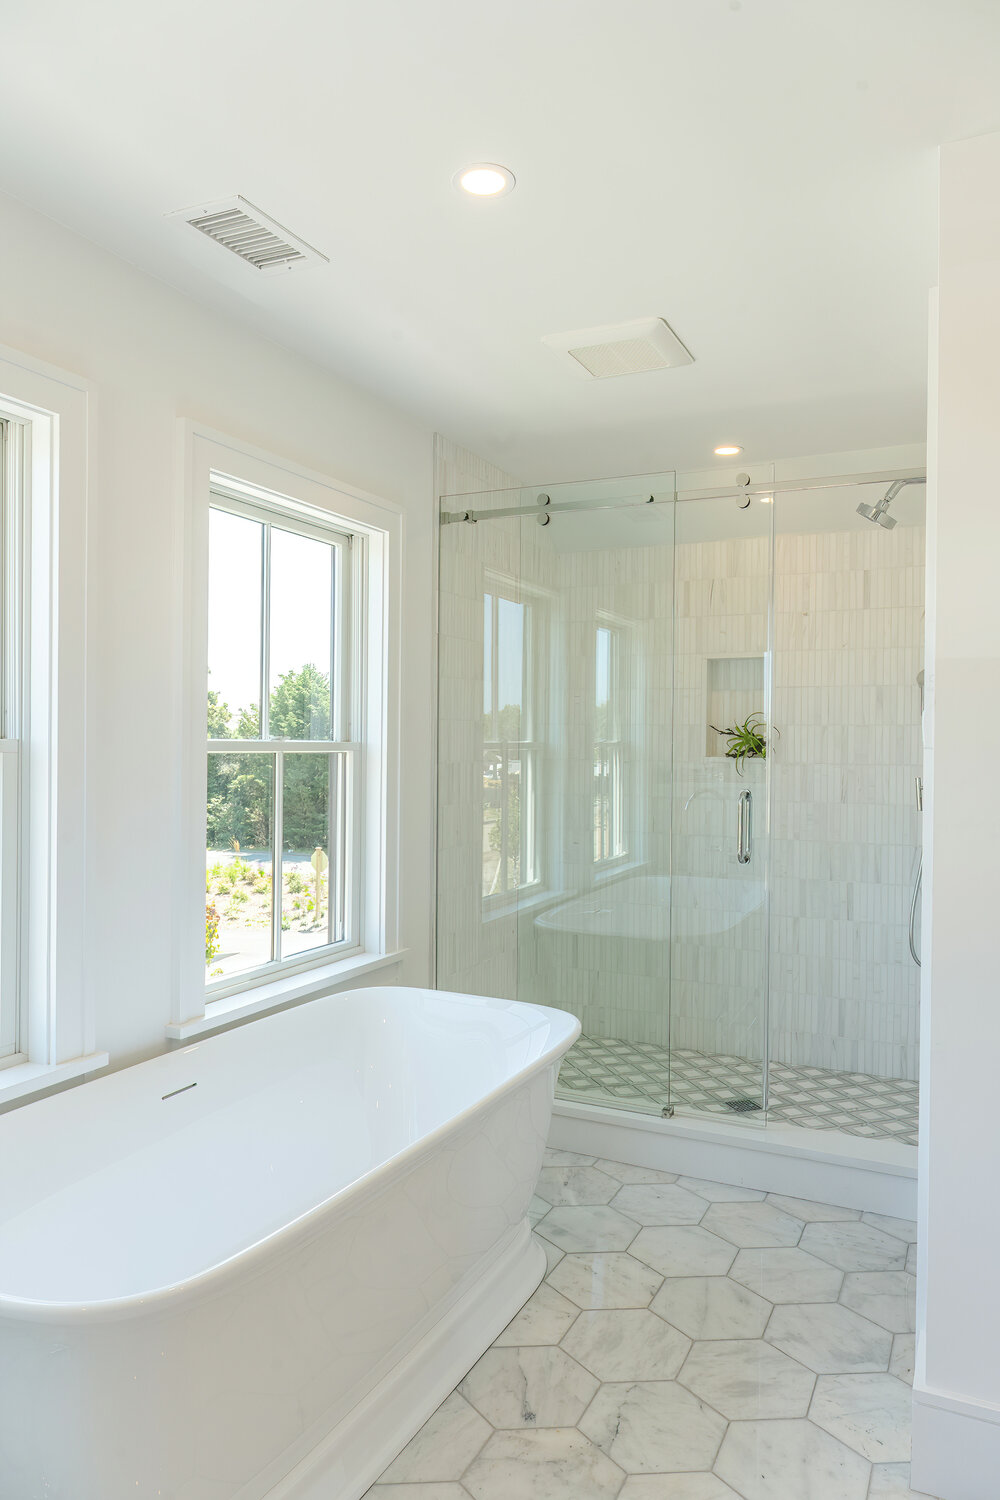 The first floor en-suite bath has a tile floor, soaking tub and glass-enclosed shower.